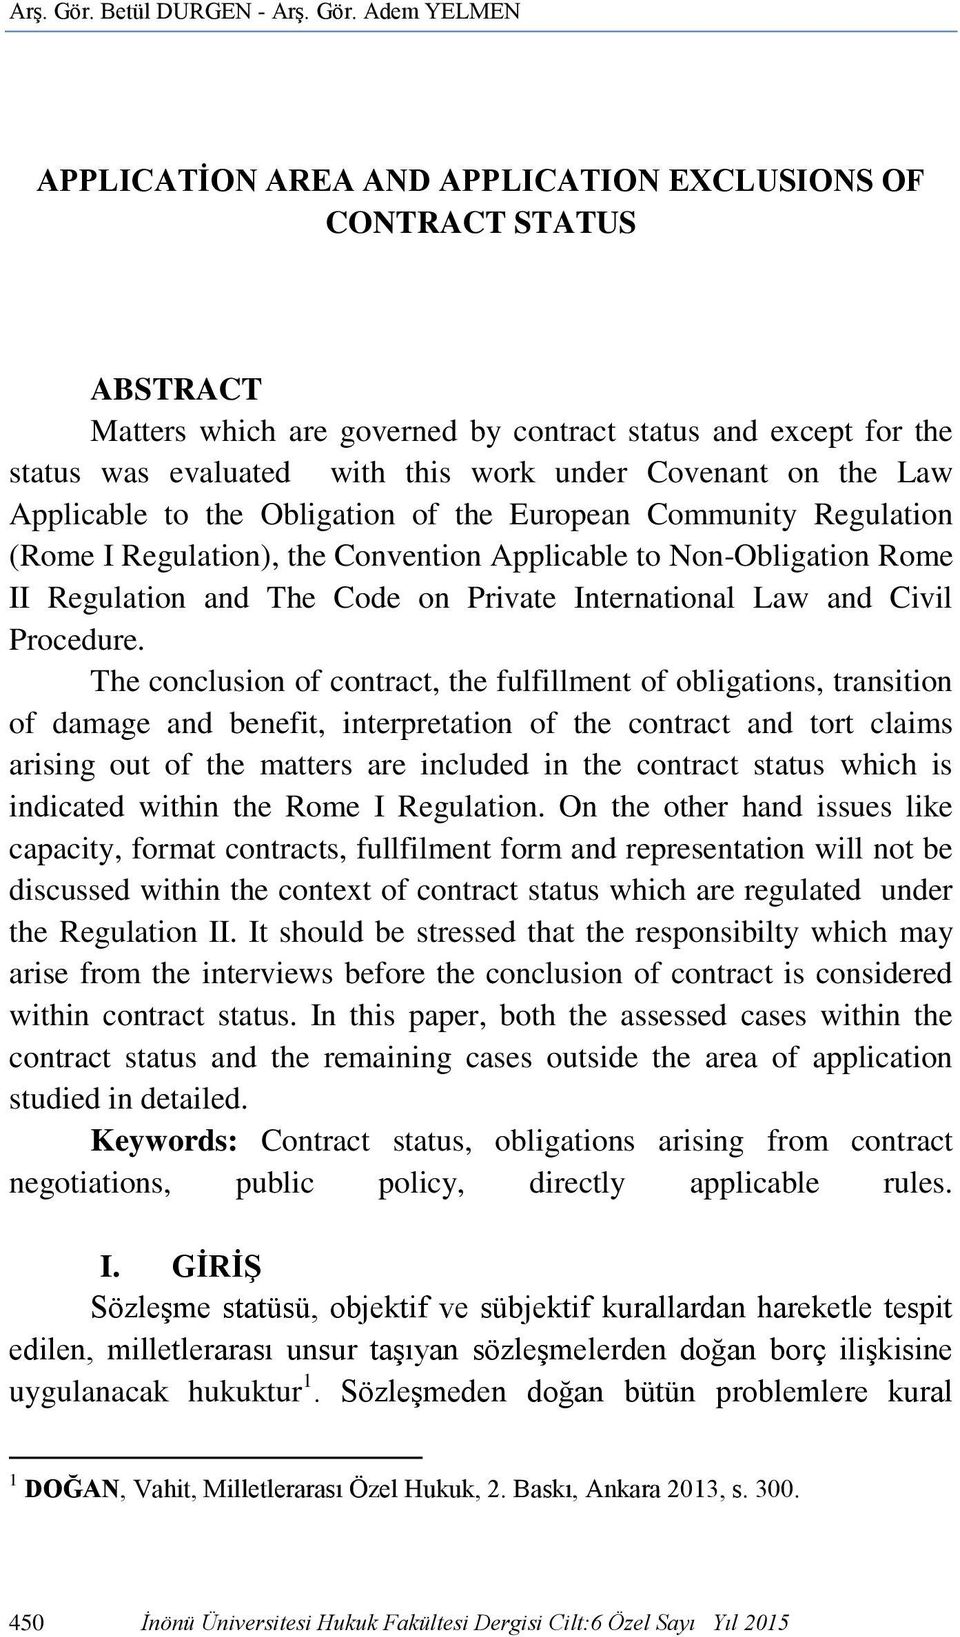 work under Covenant on the Law Applicable to the Obligation of the European Community Regulation (Rome I Regulation), the Convention Applicable to Non-Obligation Rome II Regulation and The Code on